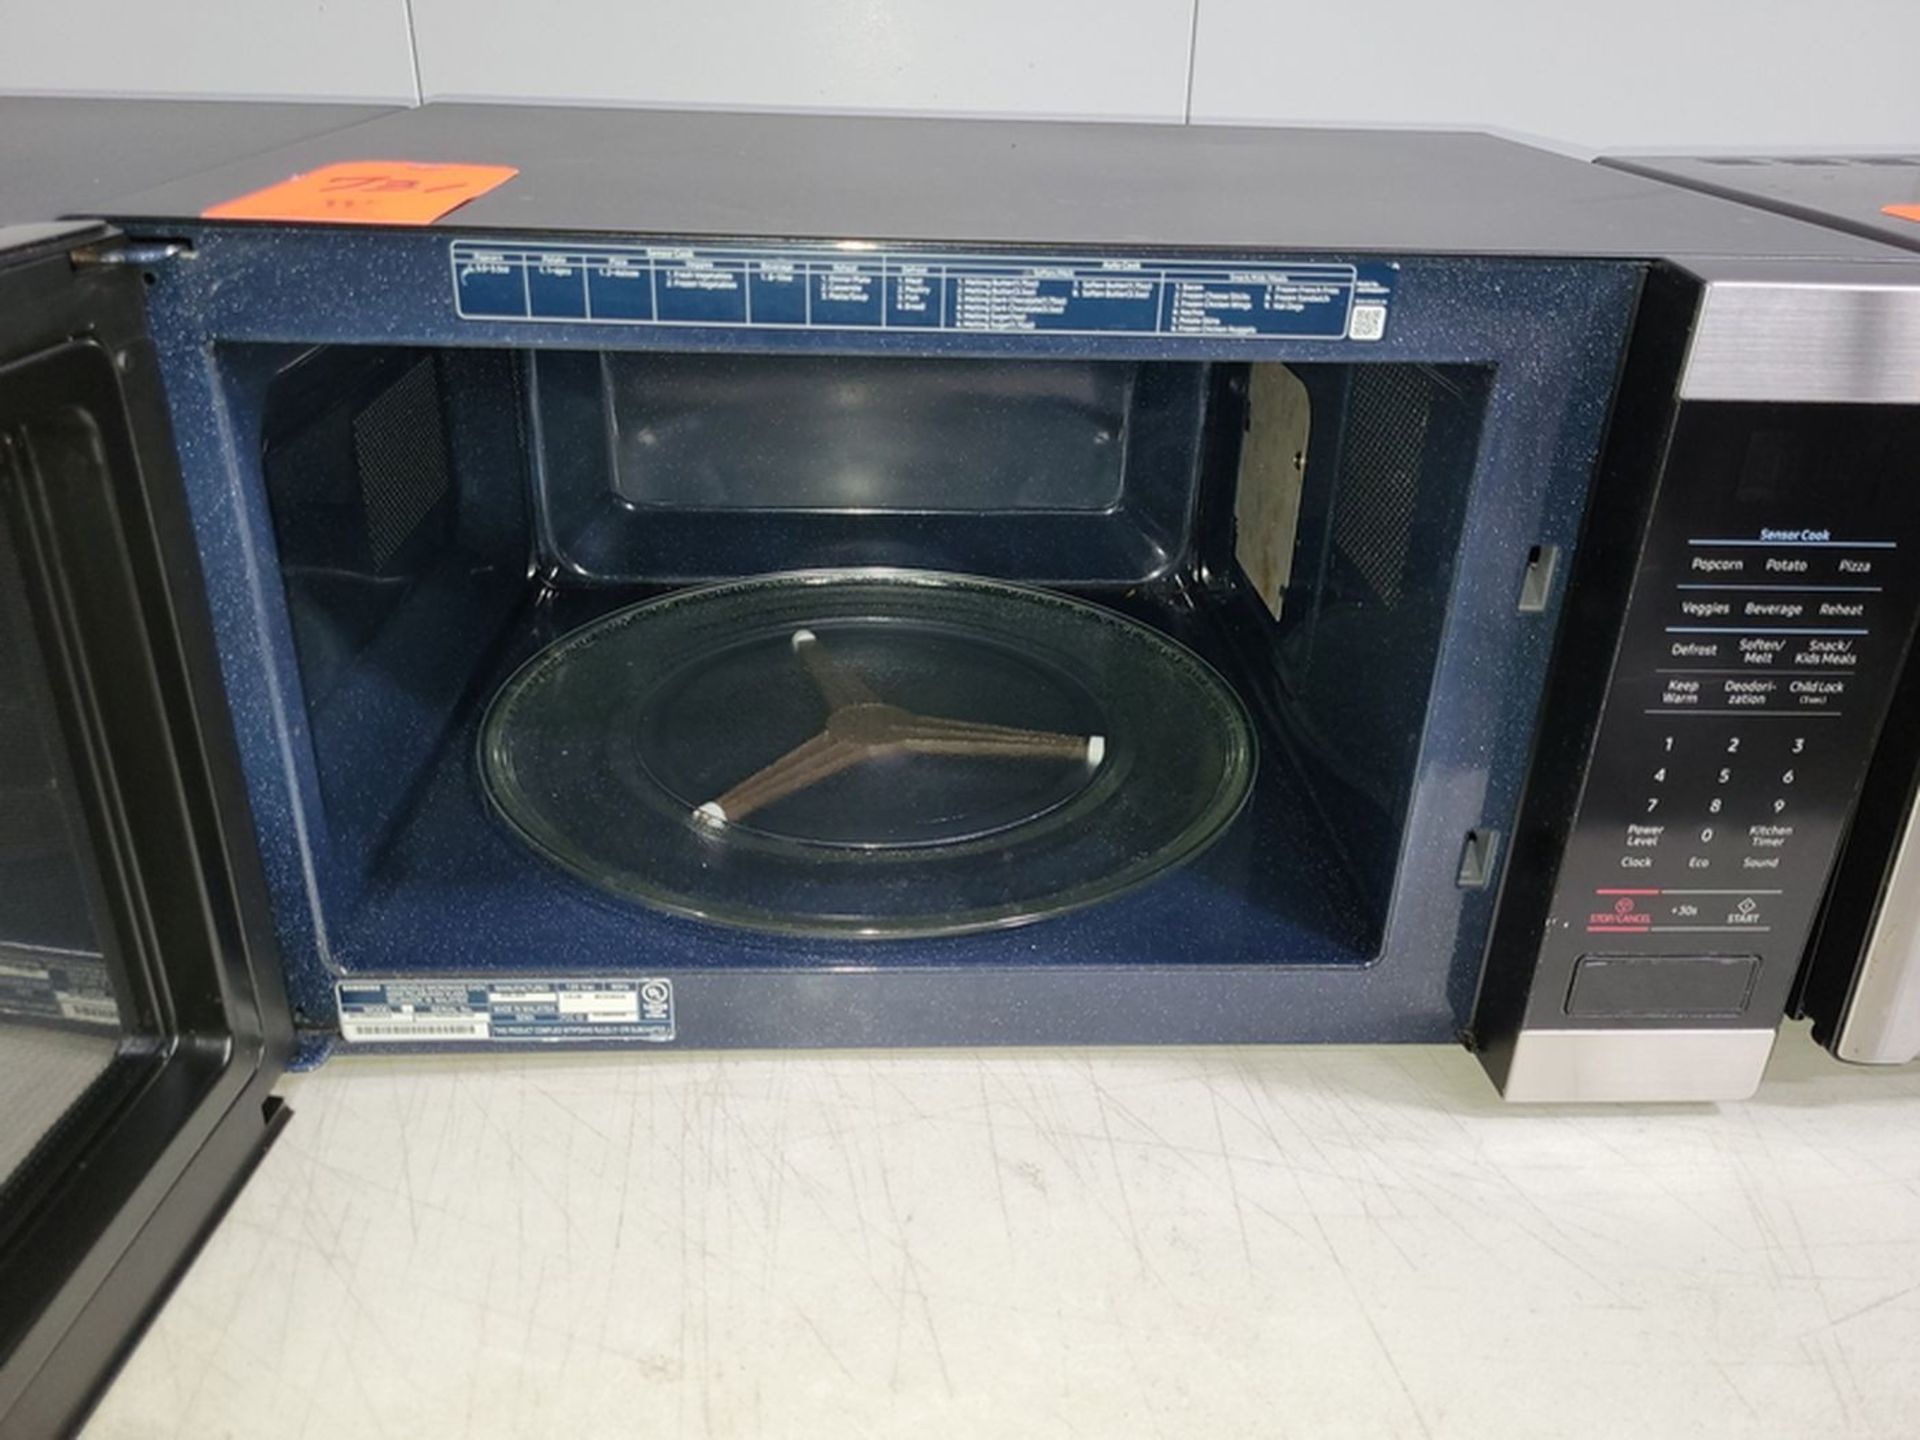 Samsung Model MS19M8000AS Microwave Oven, S/N: 0B3V7WRN608170E (2020); 120-Volt - Image 2 of 2